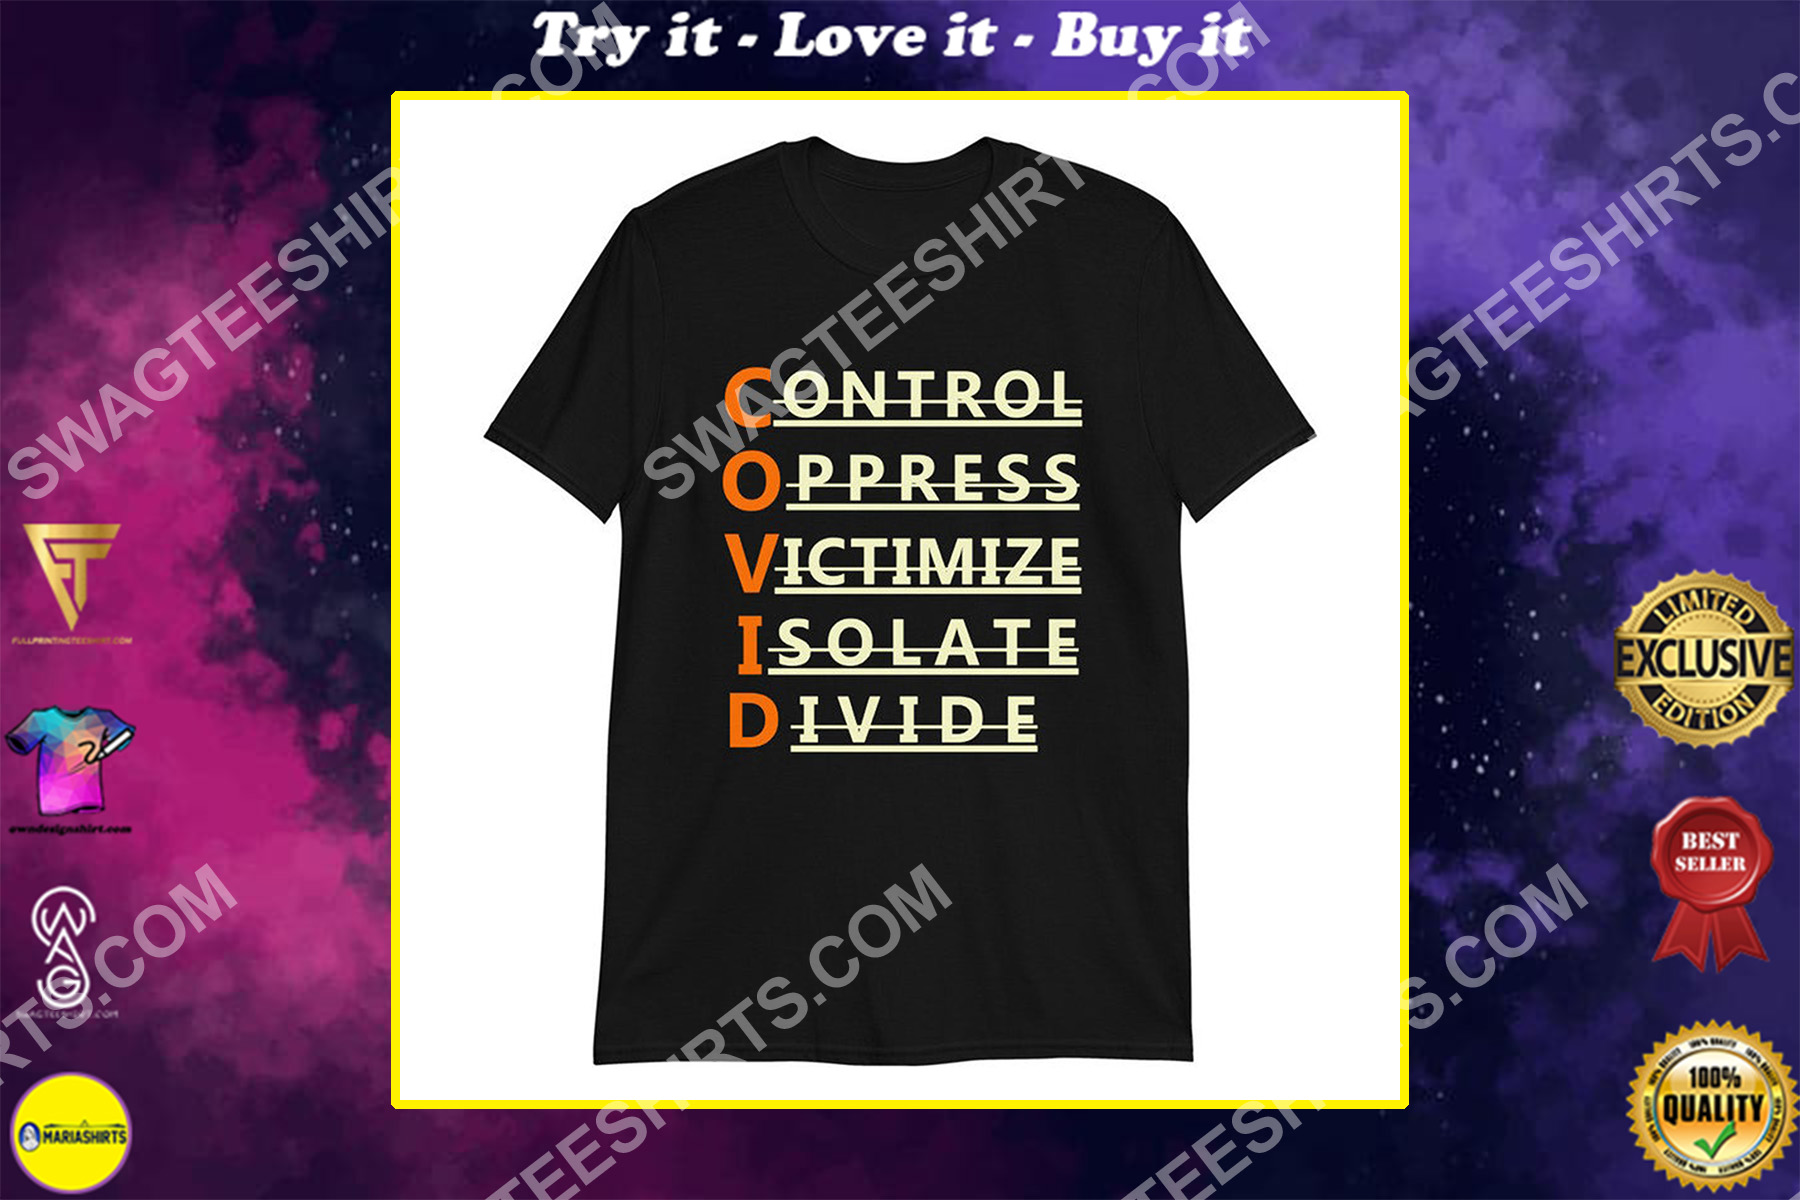 control oppress victimize isolate divide shirt